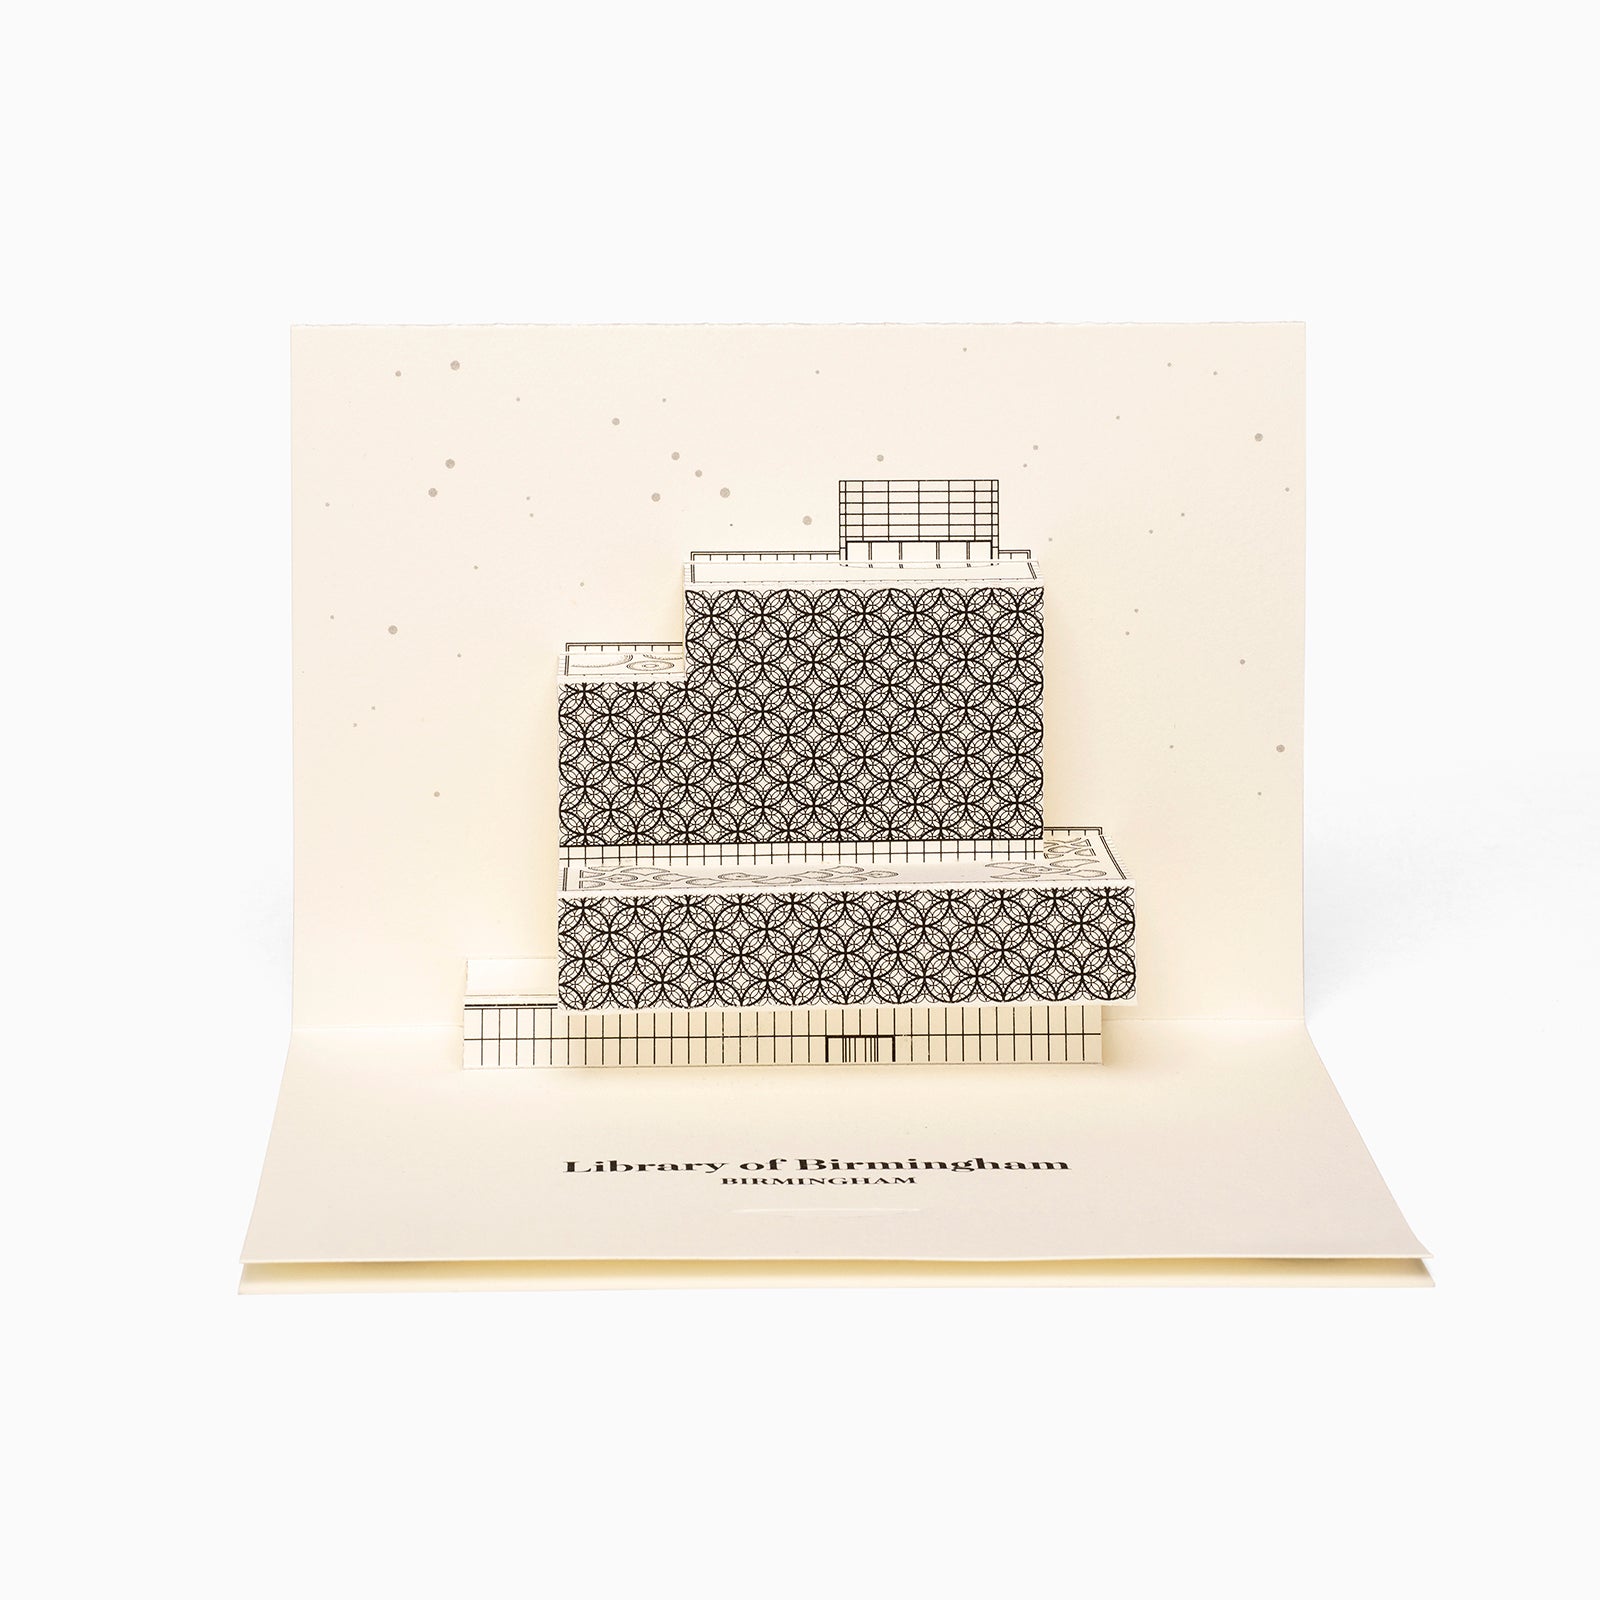 Library of Birmingham Pop-up Card by Paperlandmarks in cream colour